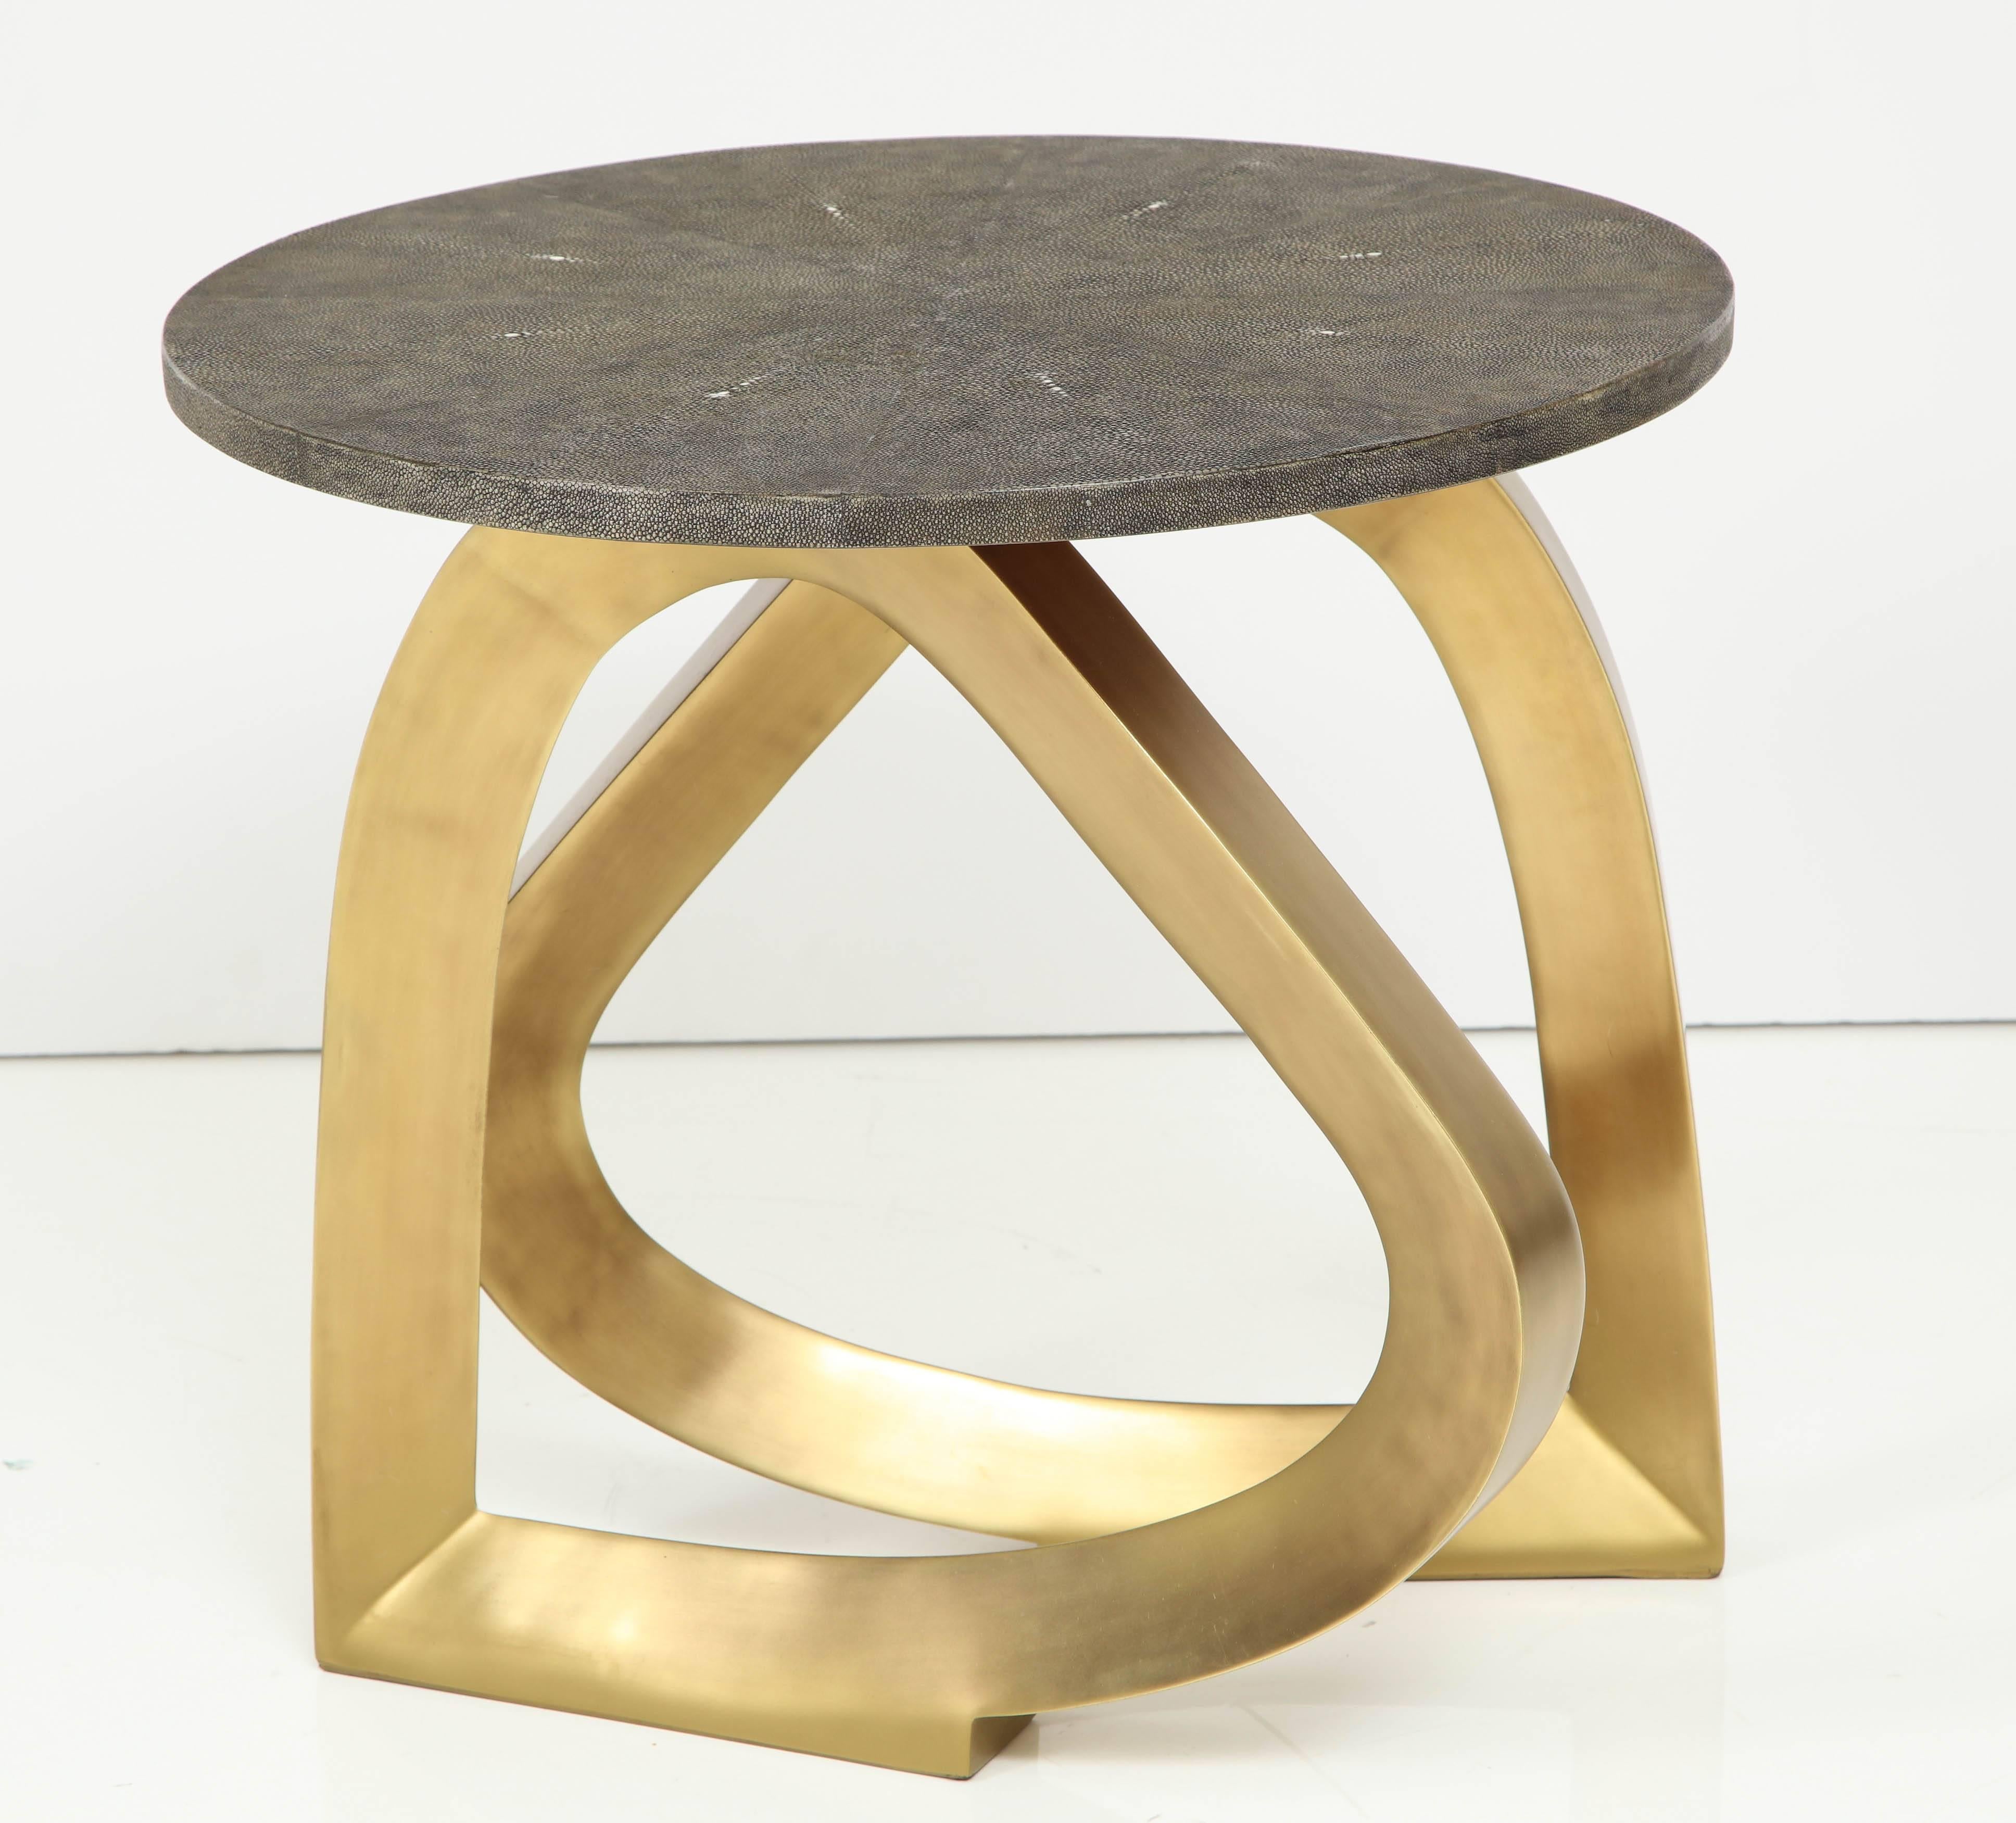 Decorative shagreen and brass side table. The two brass legs look like the shape of a heart. Designed in France. The table also comes in cream shagreen. Production time is 15-16 weeks plus delivery.